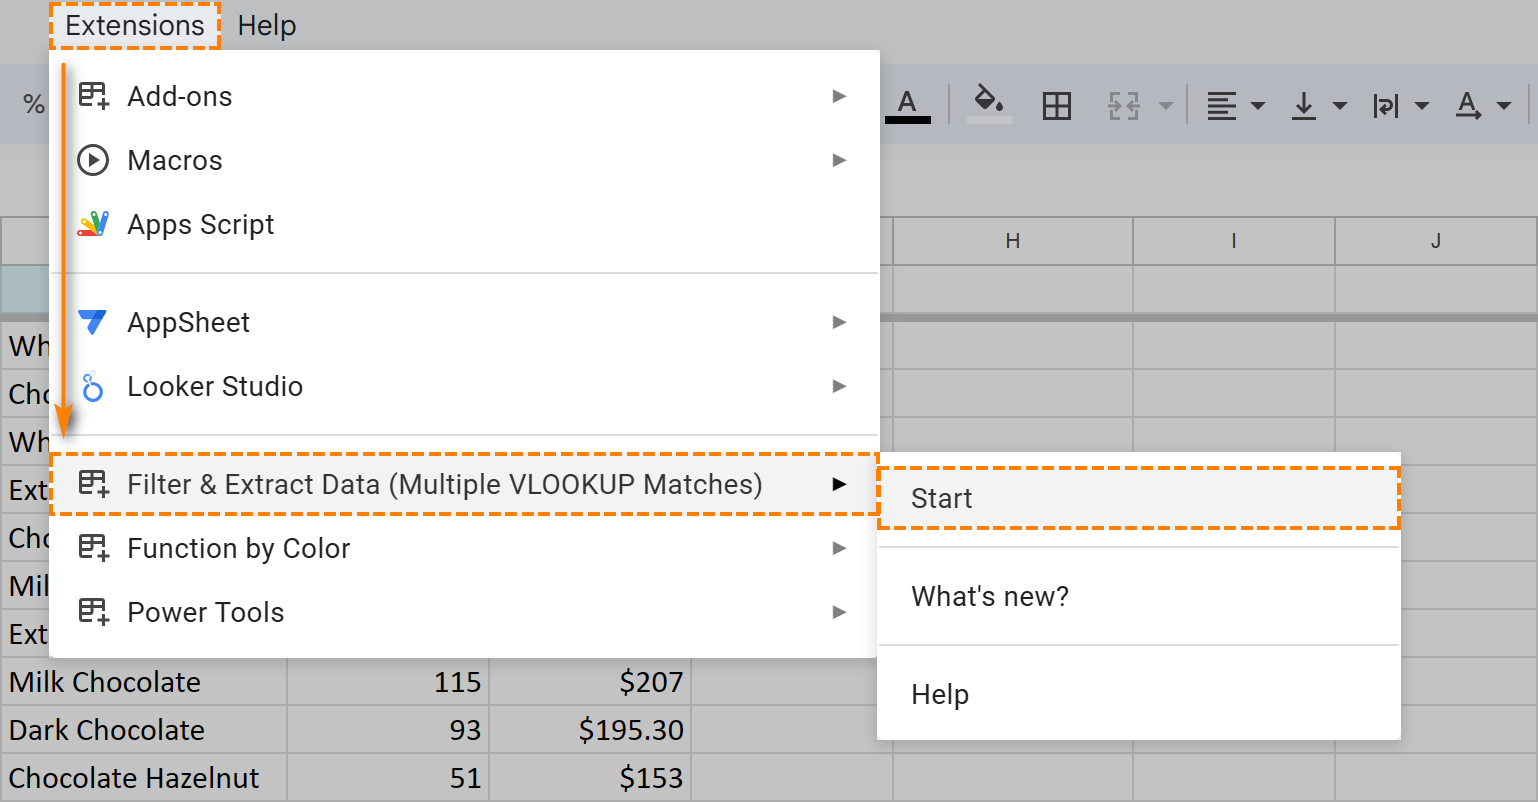 Spreadsheet menu where you start the extensions.